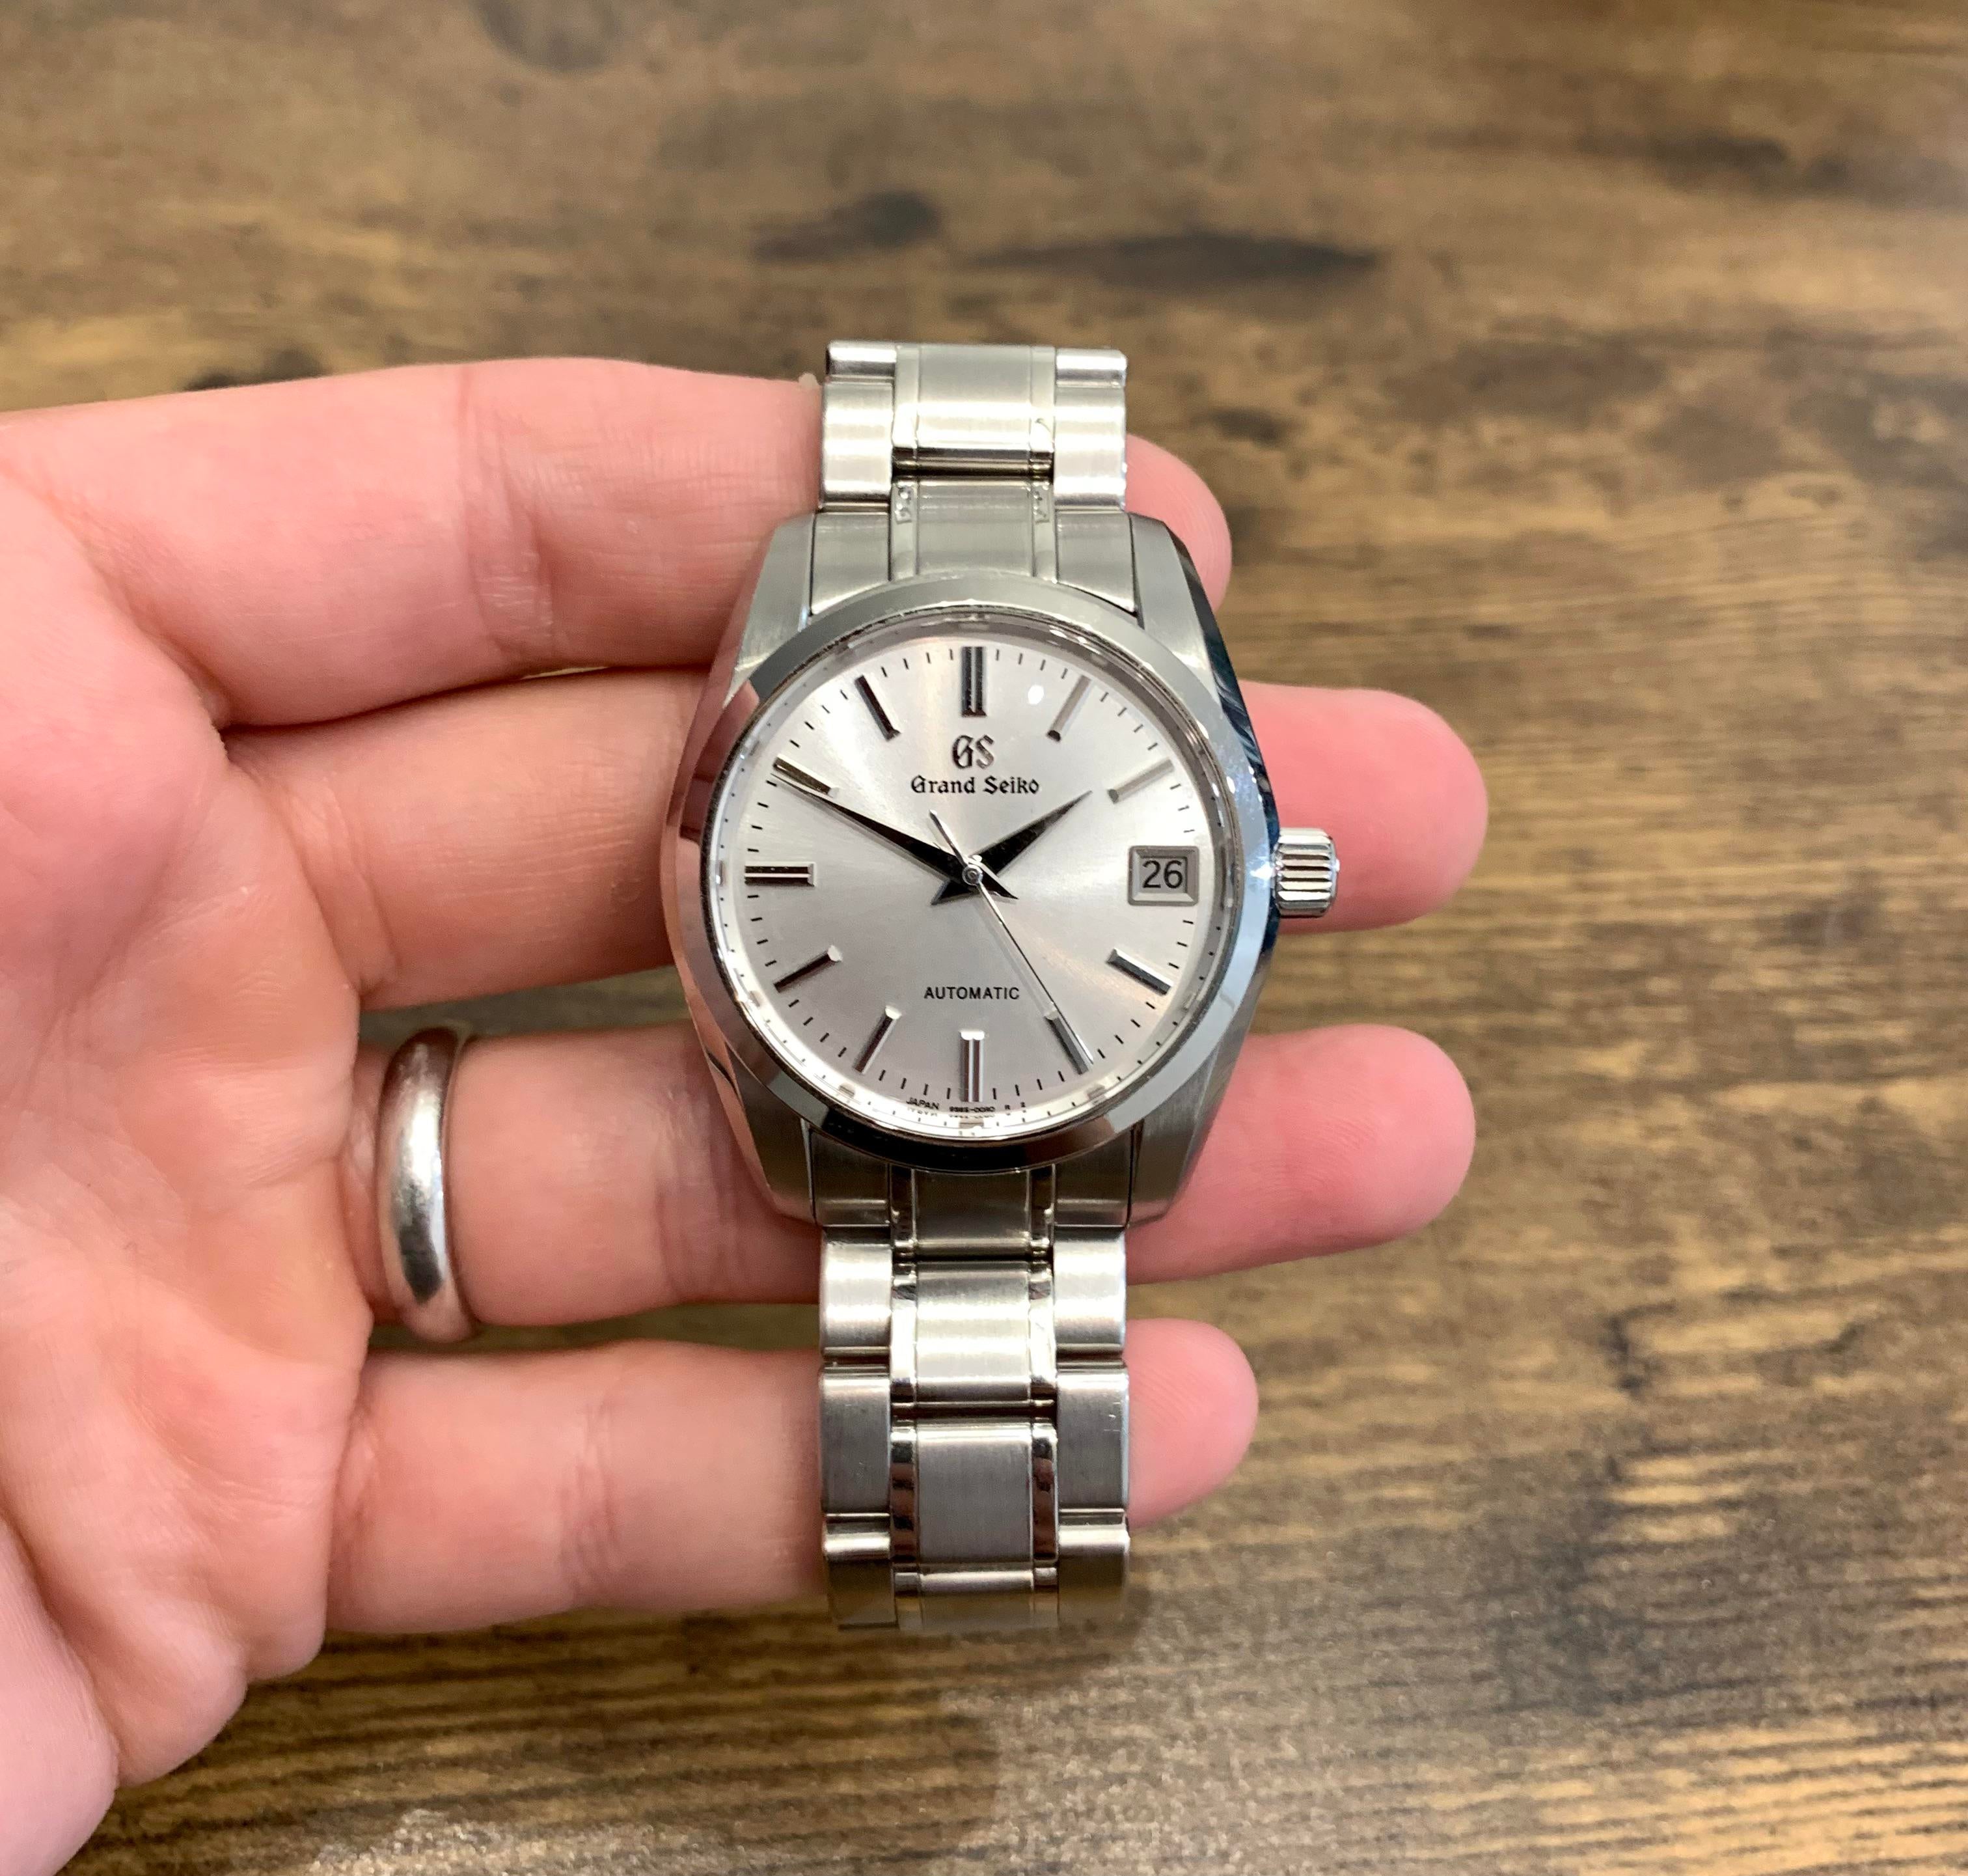 WTS] Grand Seiko SBGR251 with Boxes and Warranty Card - $2650 | WatchCharts